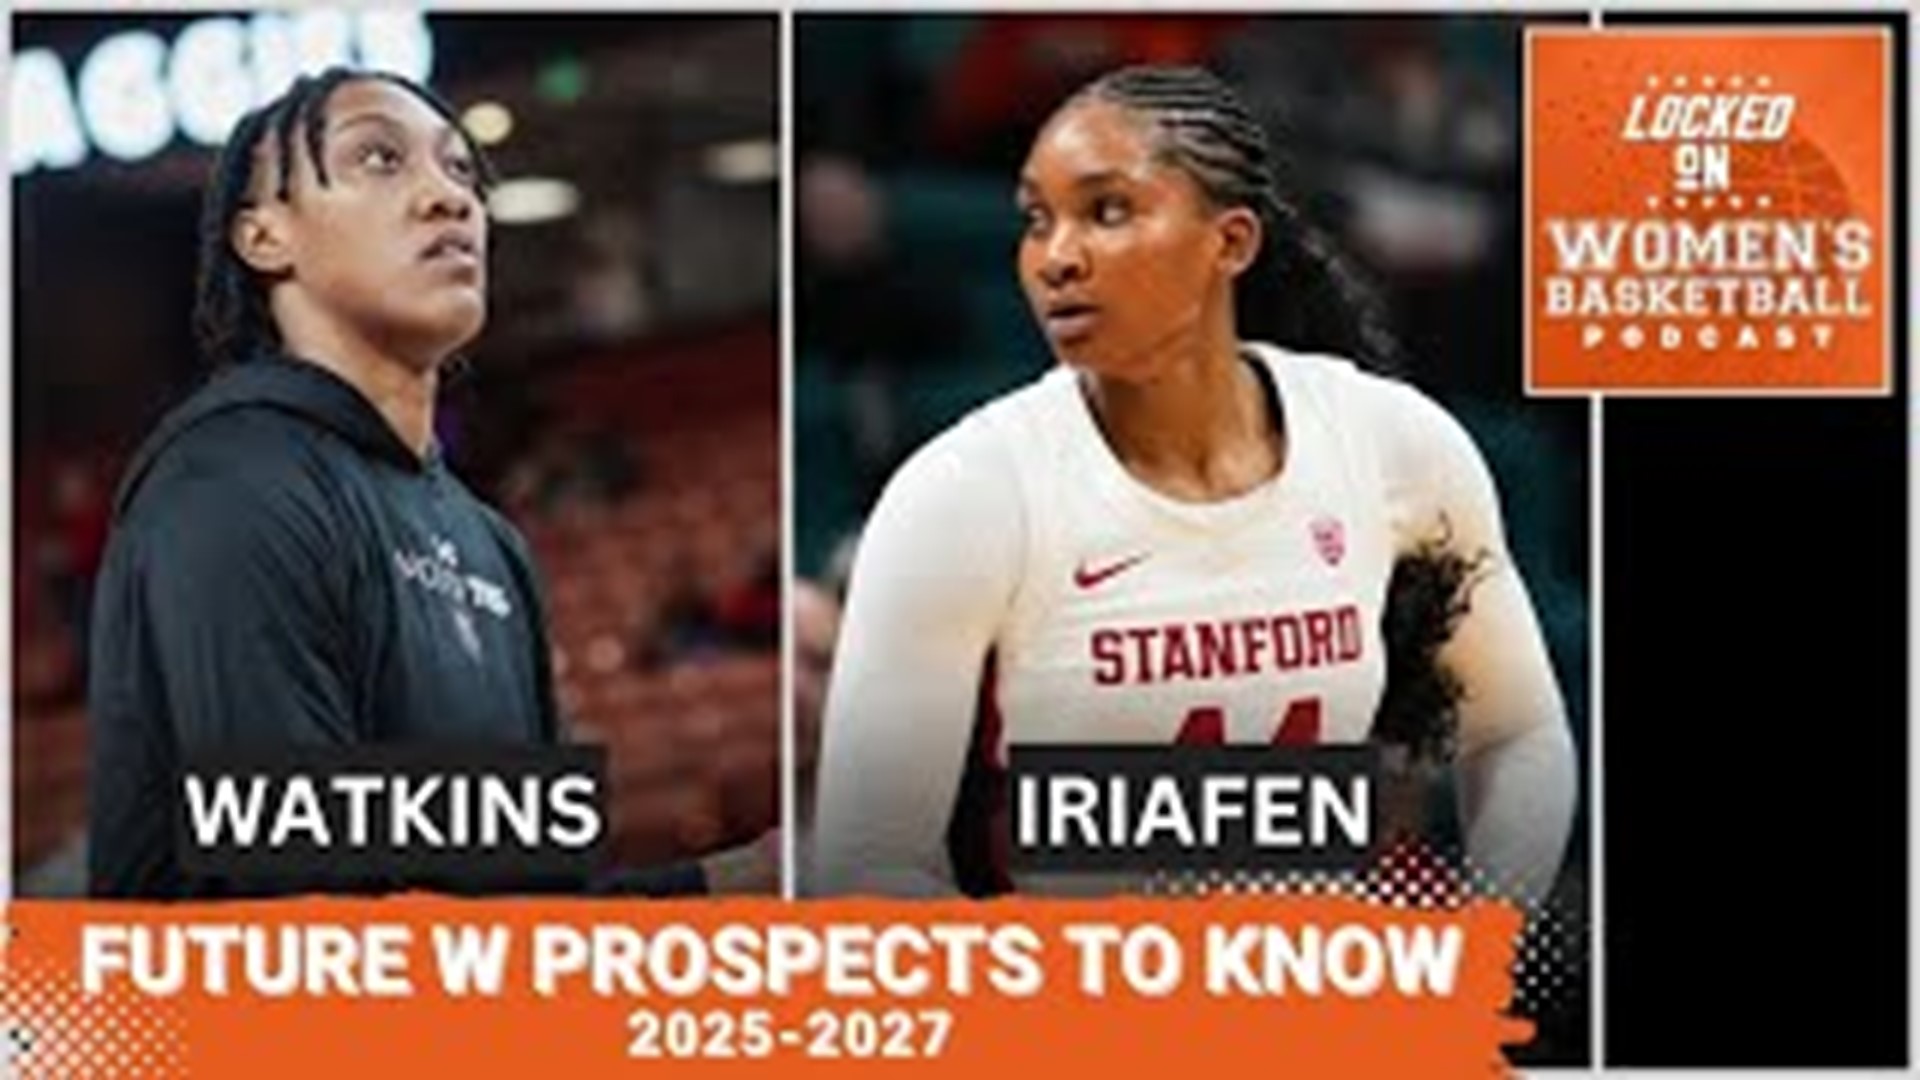 Host Em Adler is joined by co-host Lincoln Shafer to talk about their favorite non-senior prospects in college basketball, including South Carolina’s Ashlyn Watkins.